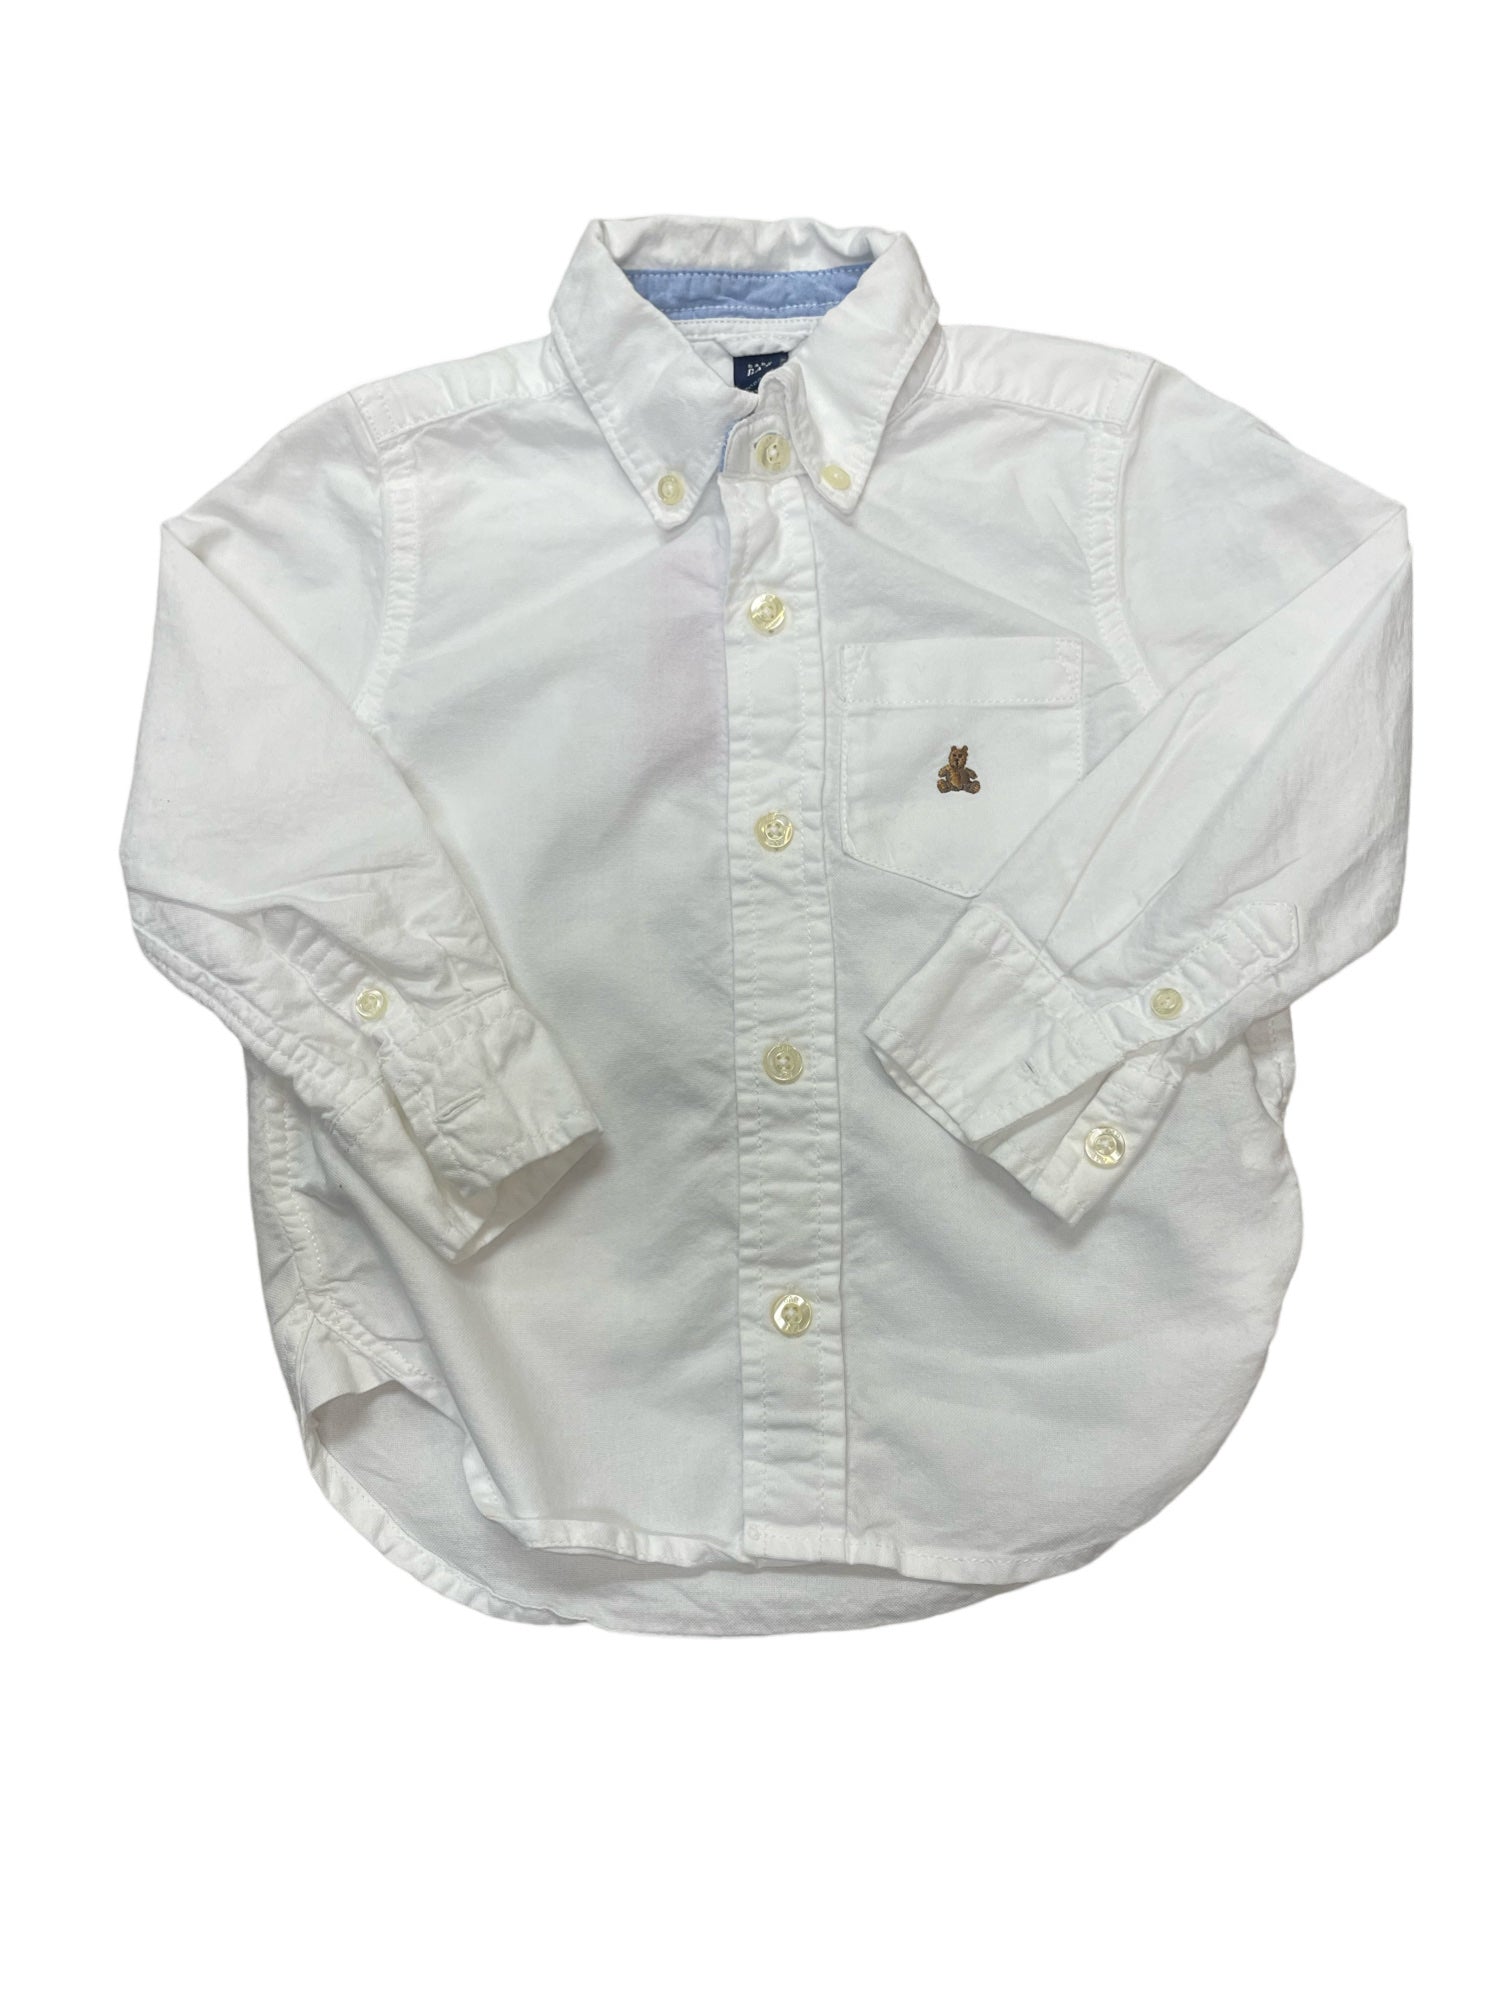 Baby Gap White Button up 3T